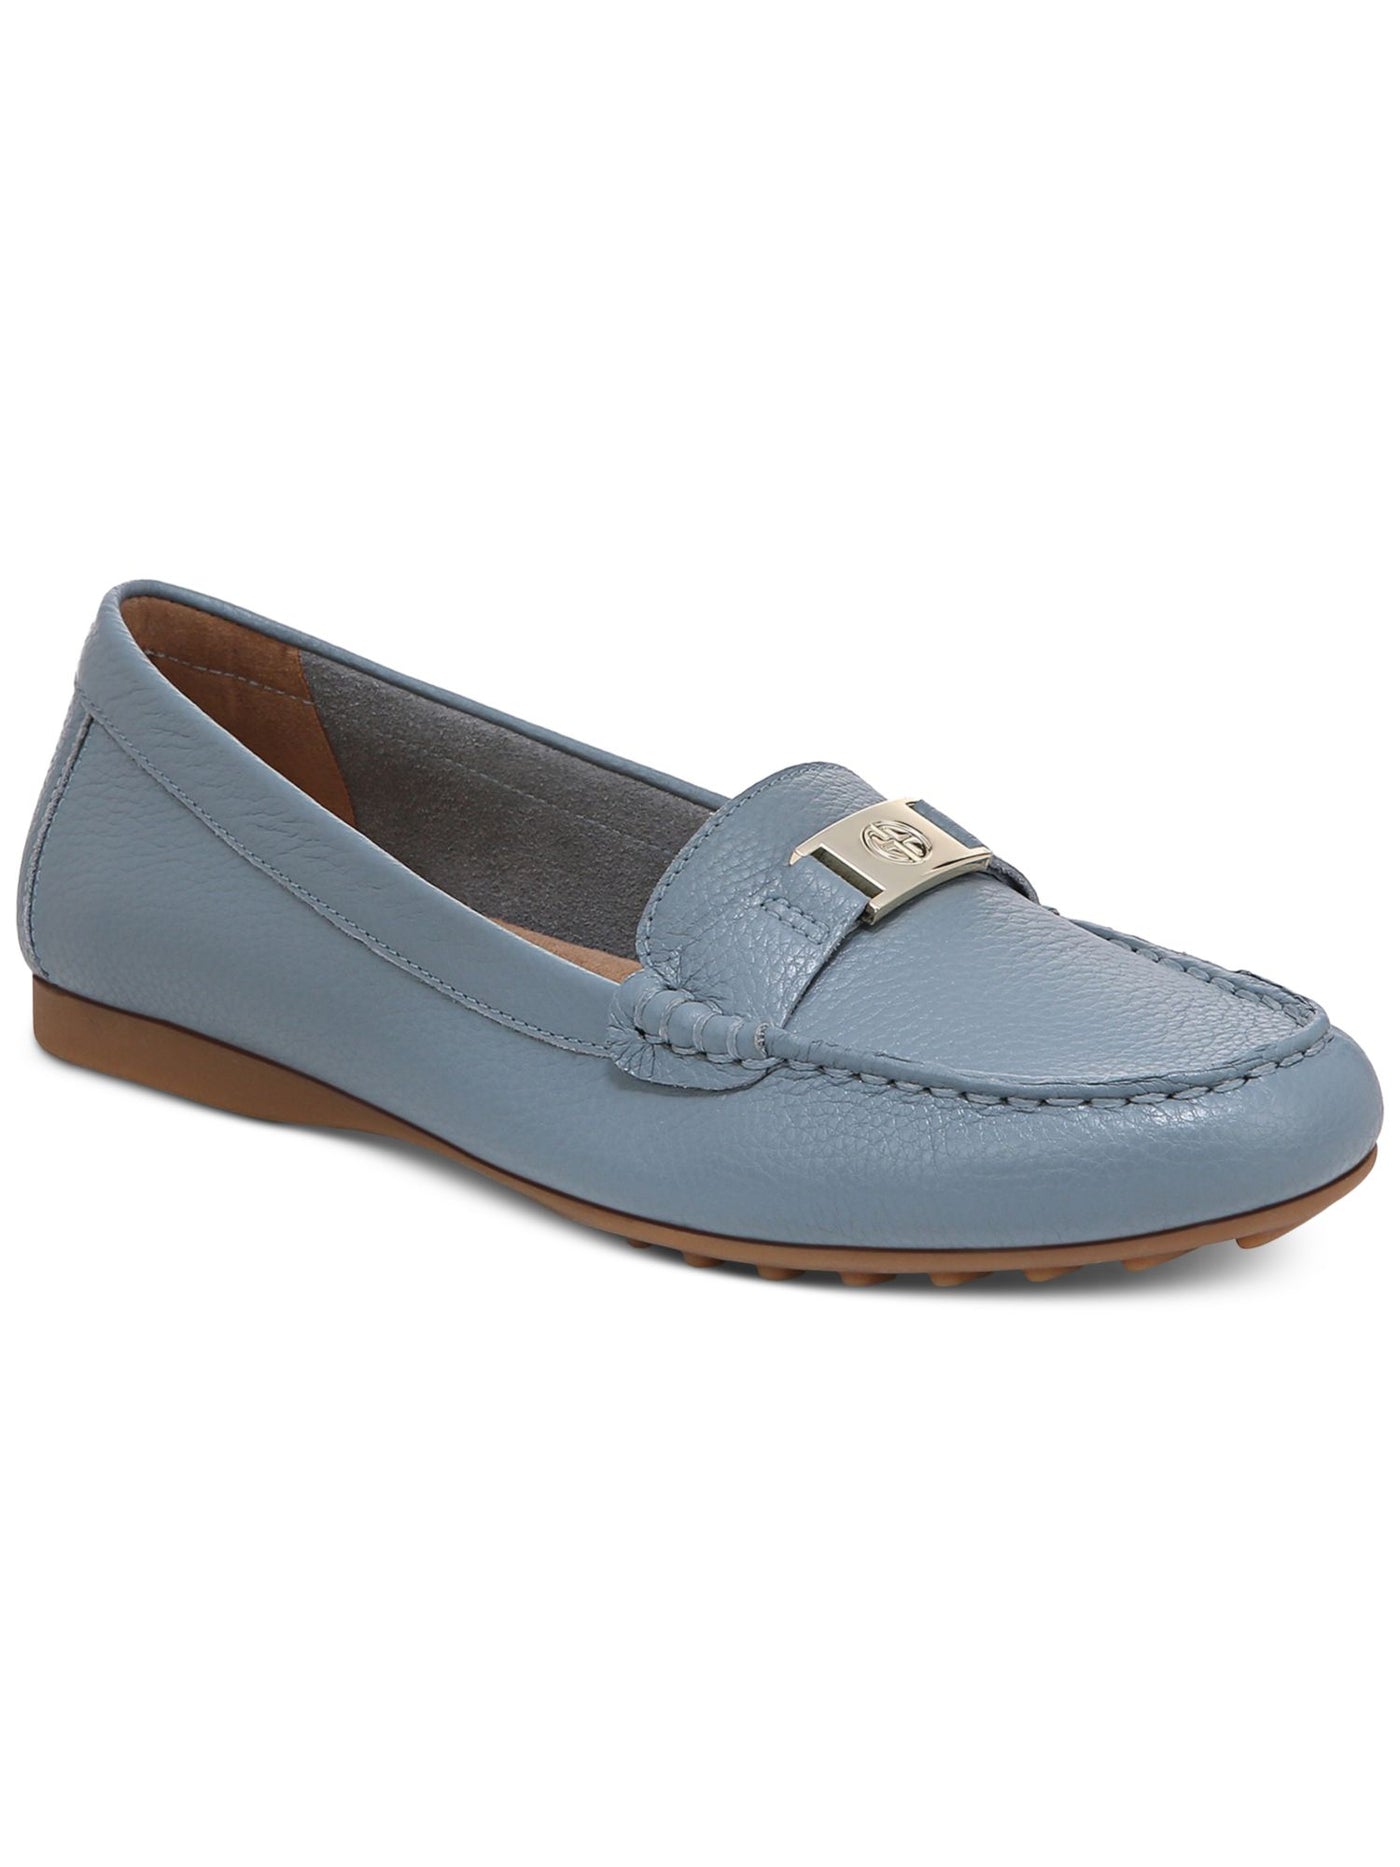 GIANI BERNINI Womens Light Blue Arch Support Cushioned Dailyn Round Toe Slip On Leather Loafers Shoes 9.5 M